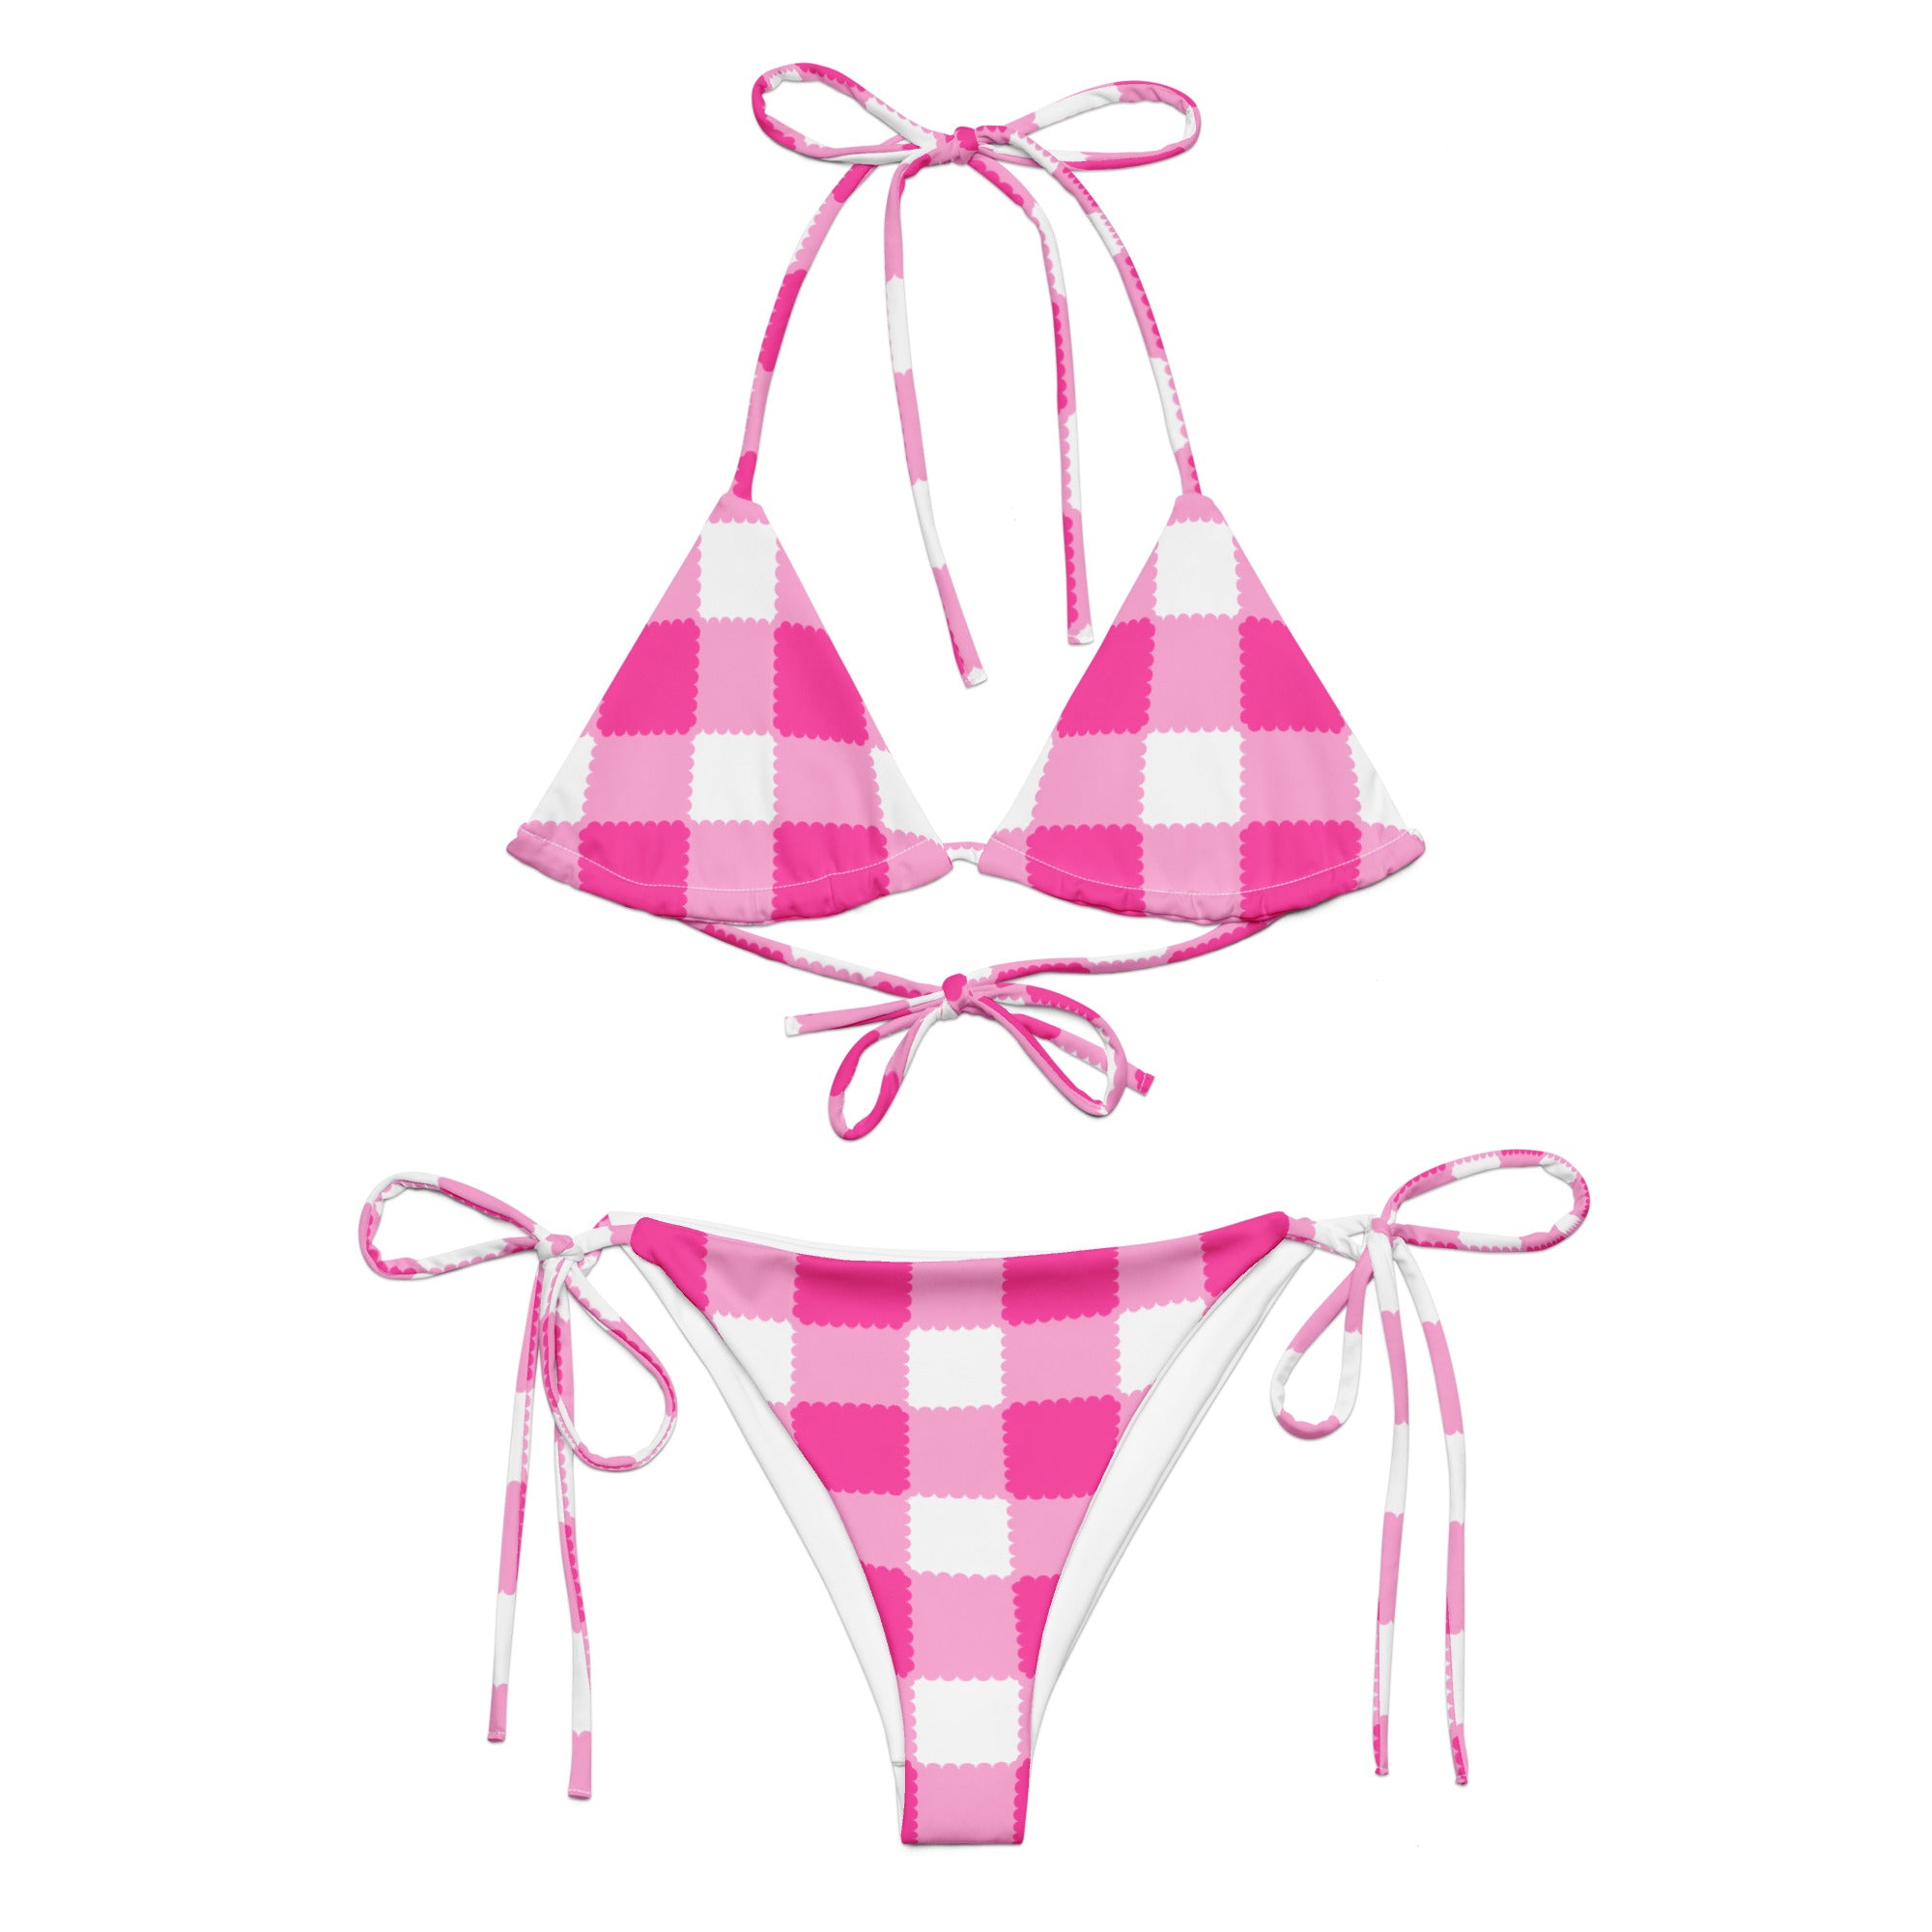 All-over Scalloped Gingham print recycled string bikini Bright Pink